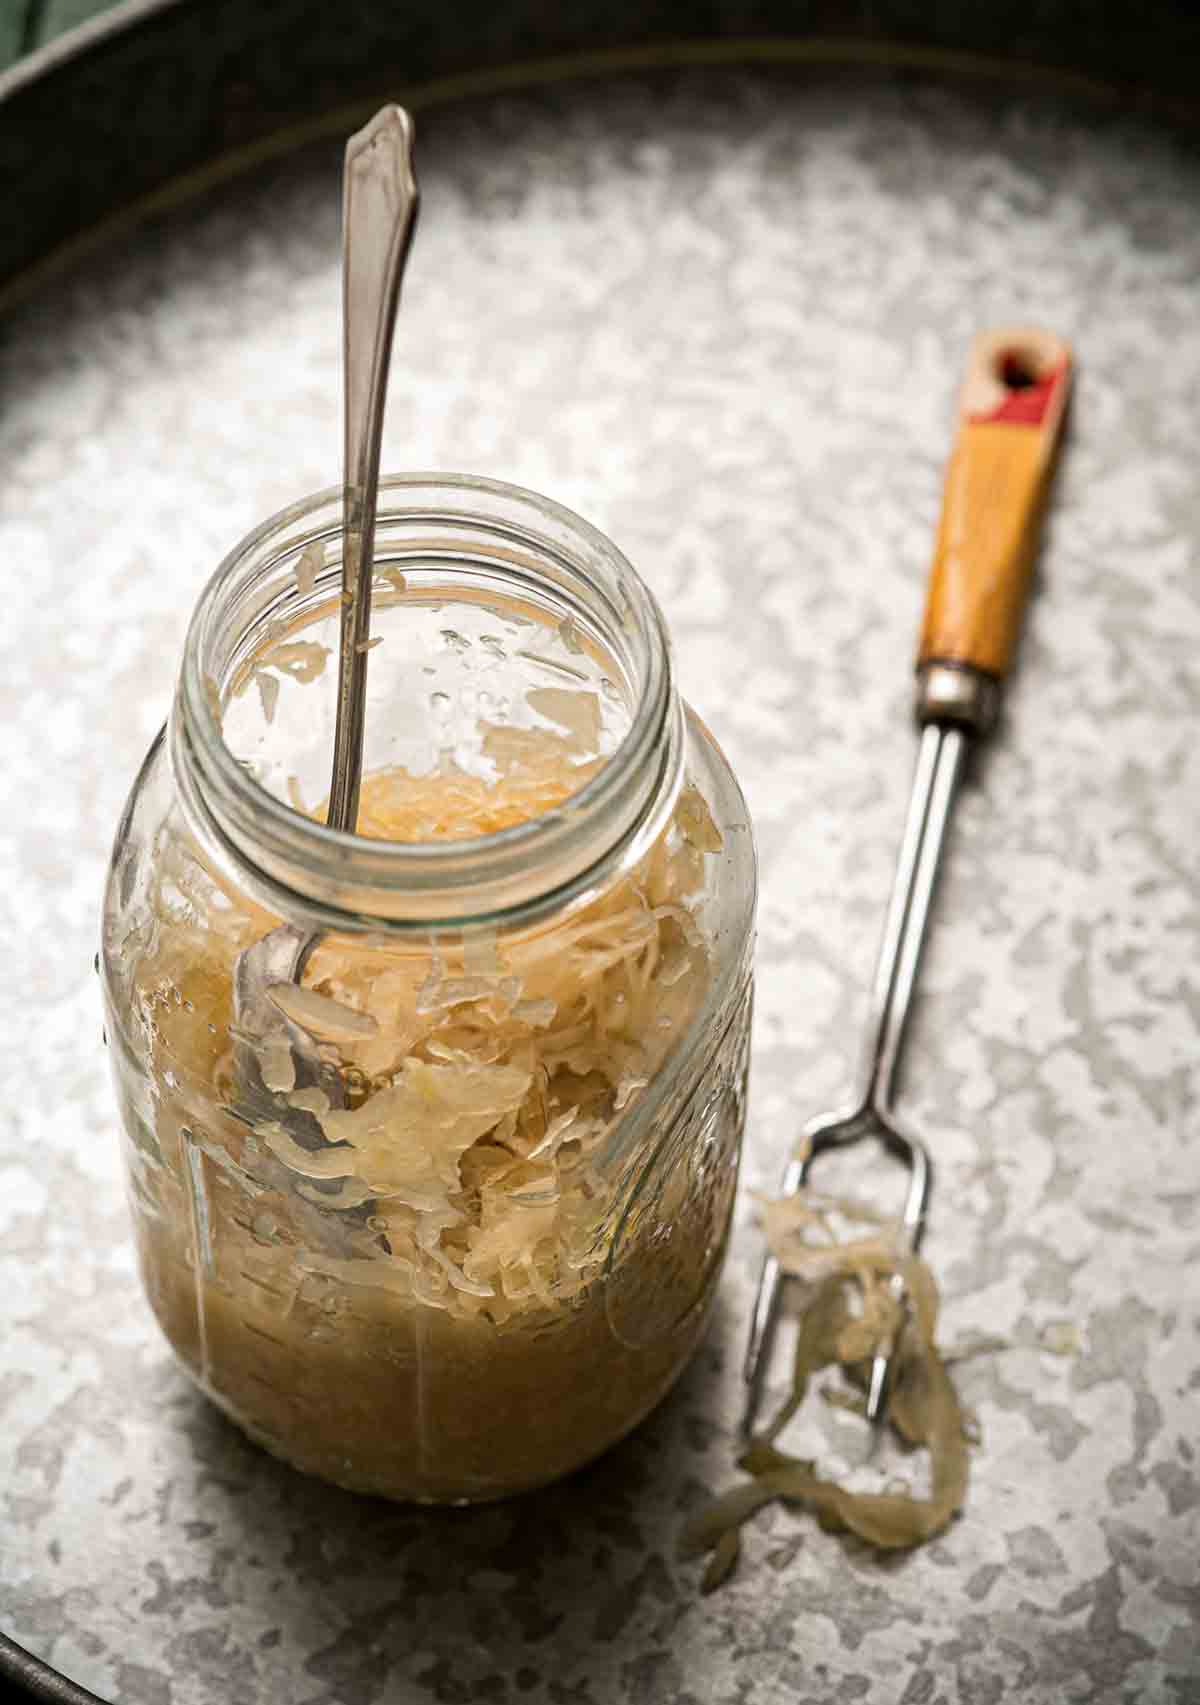 A jar of sauerkraut with a spoon standing up inside and a metal fork on the side.